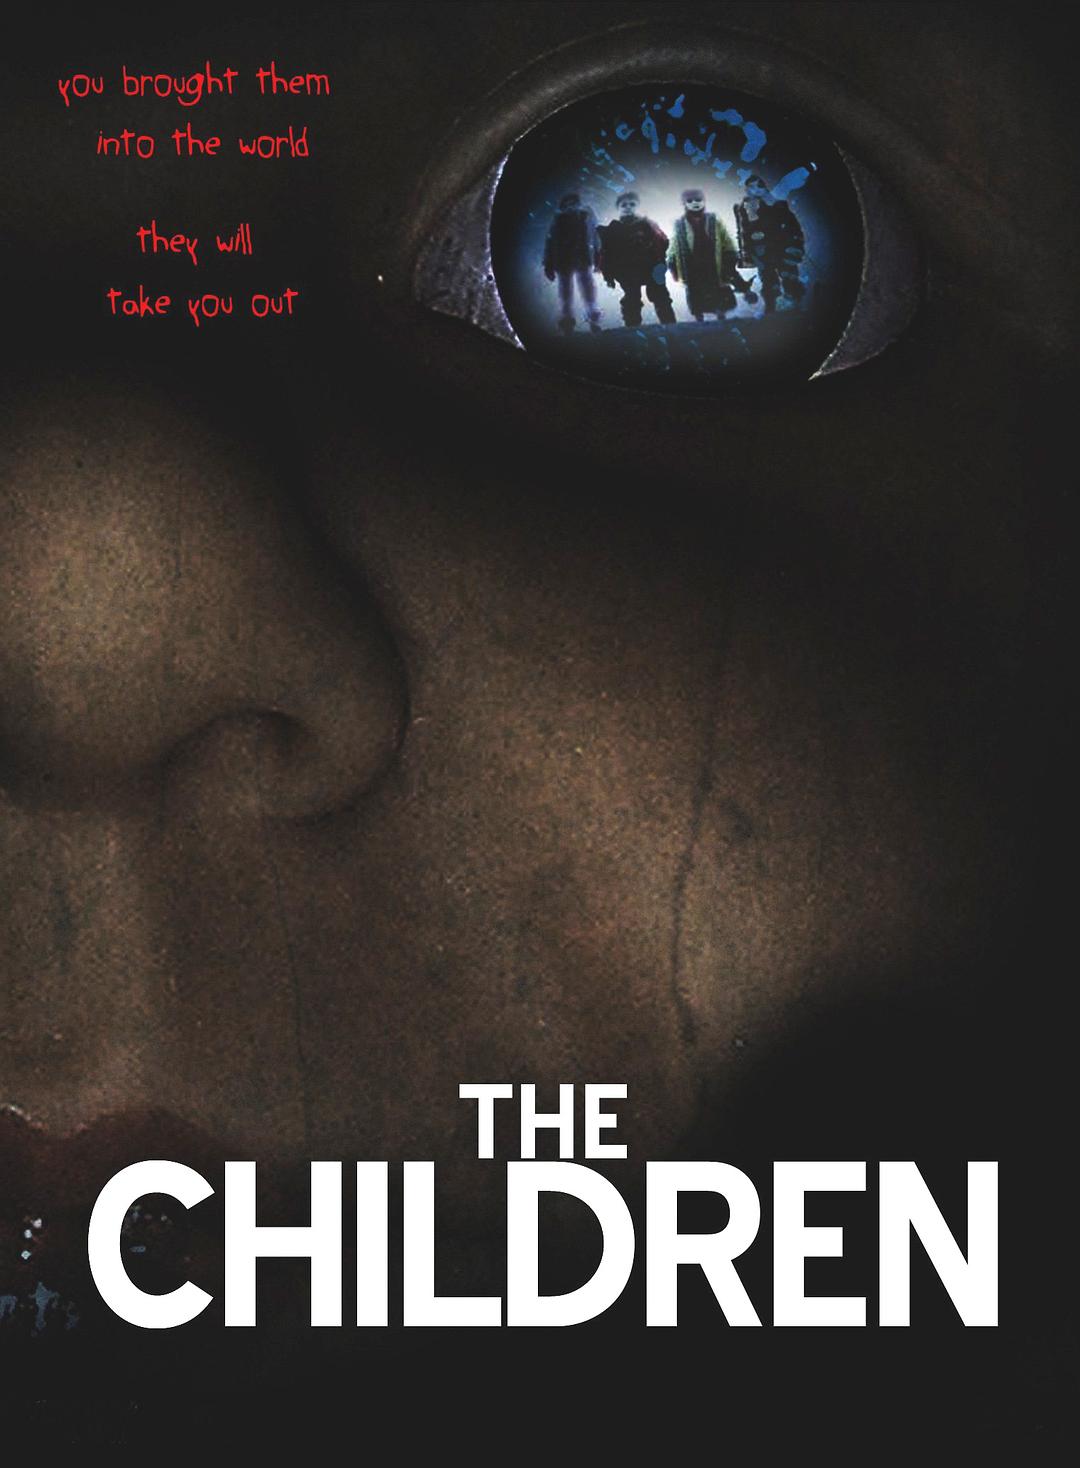 / The.Children.2008.1080p.BluRay.x264.DTS-FGT 7.67GB-1.png